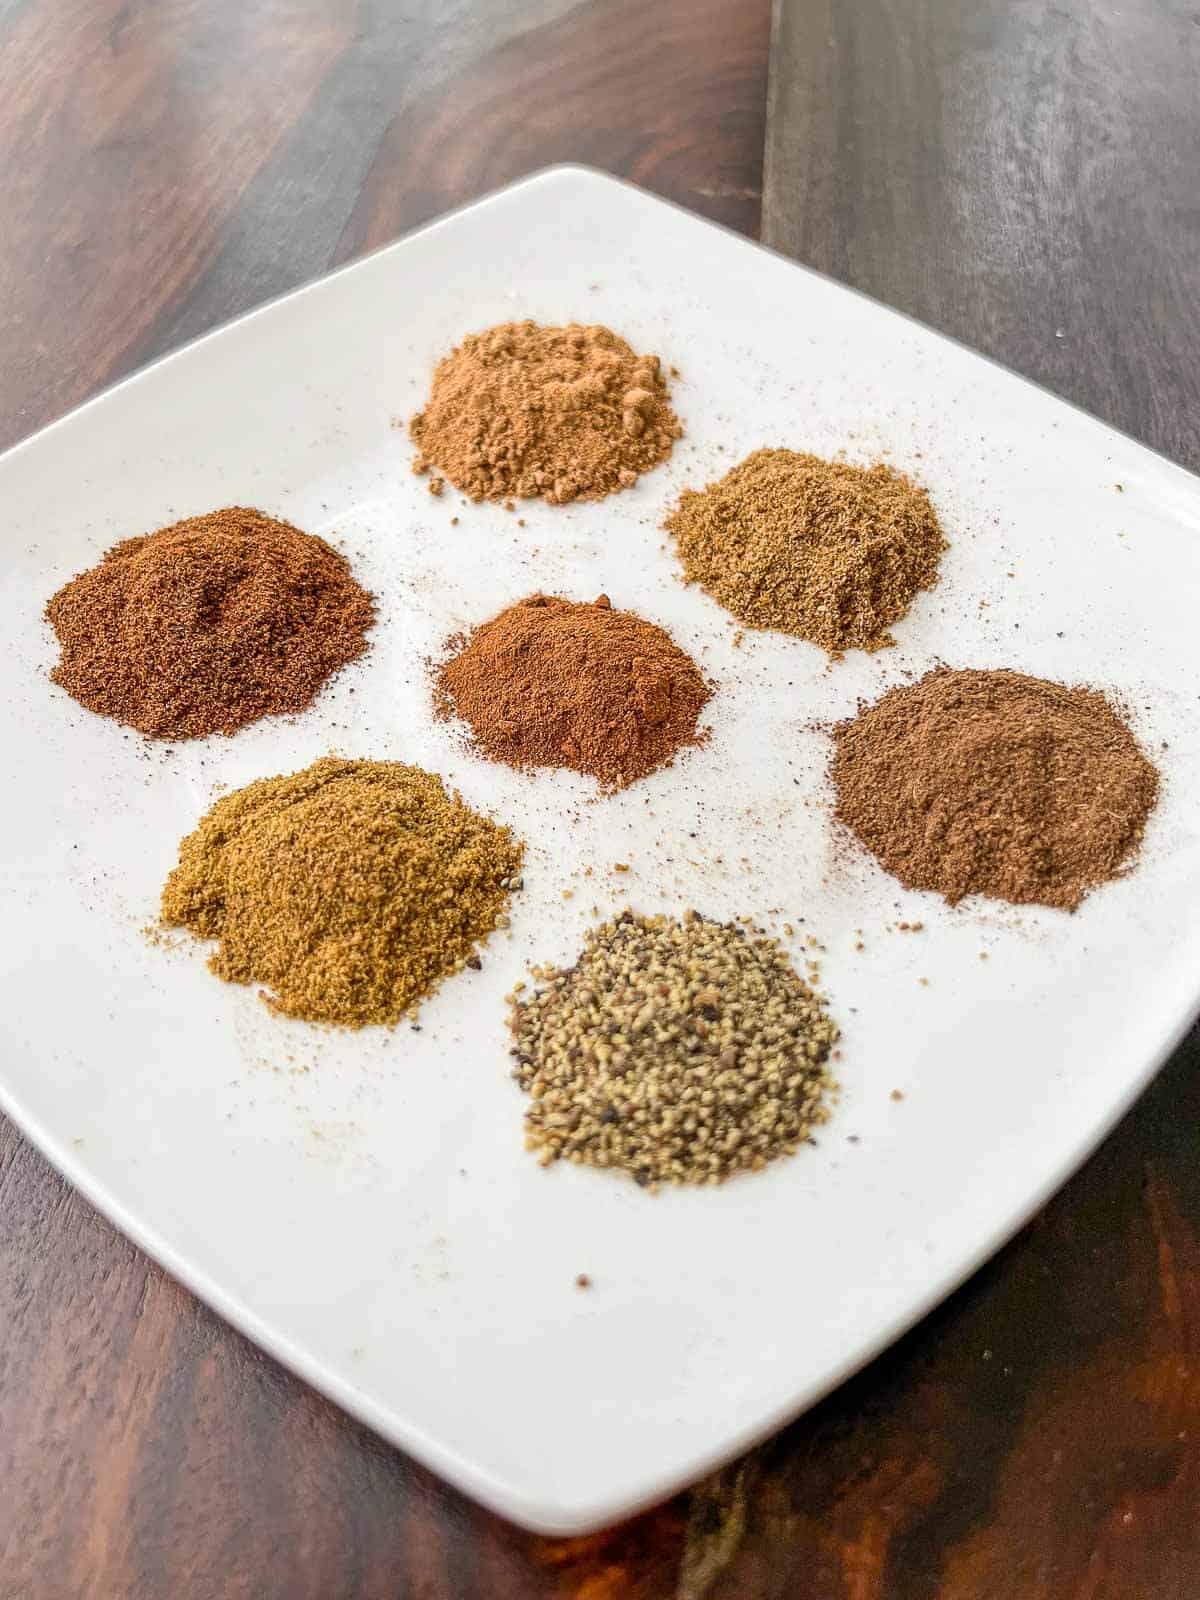 lebanese seven spices ingredients separated in a white plate.